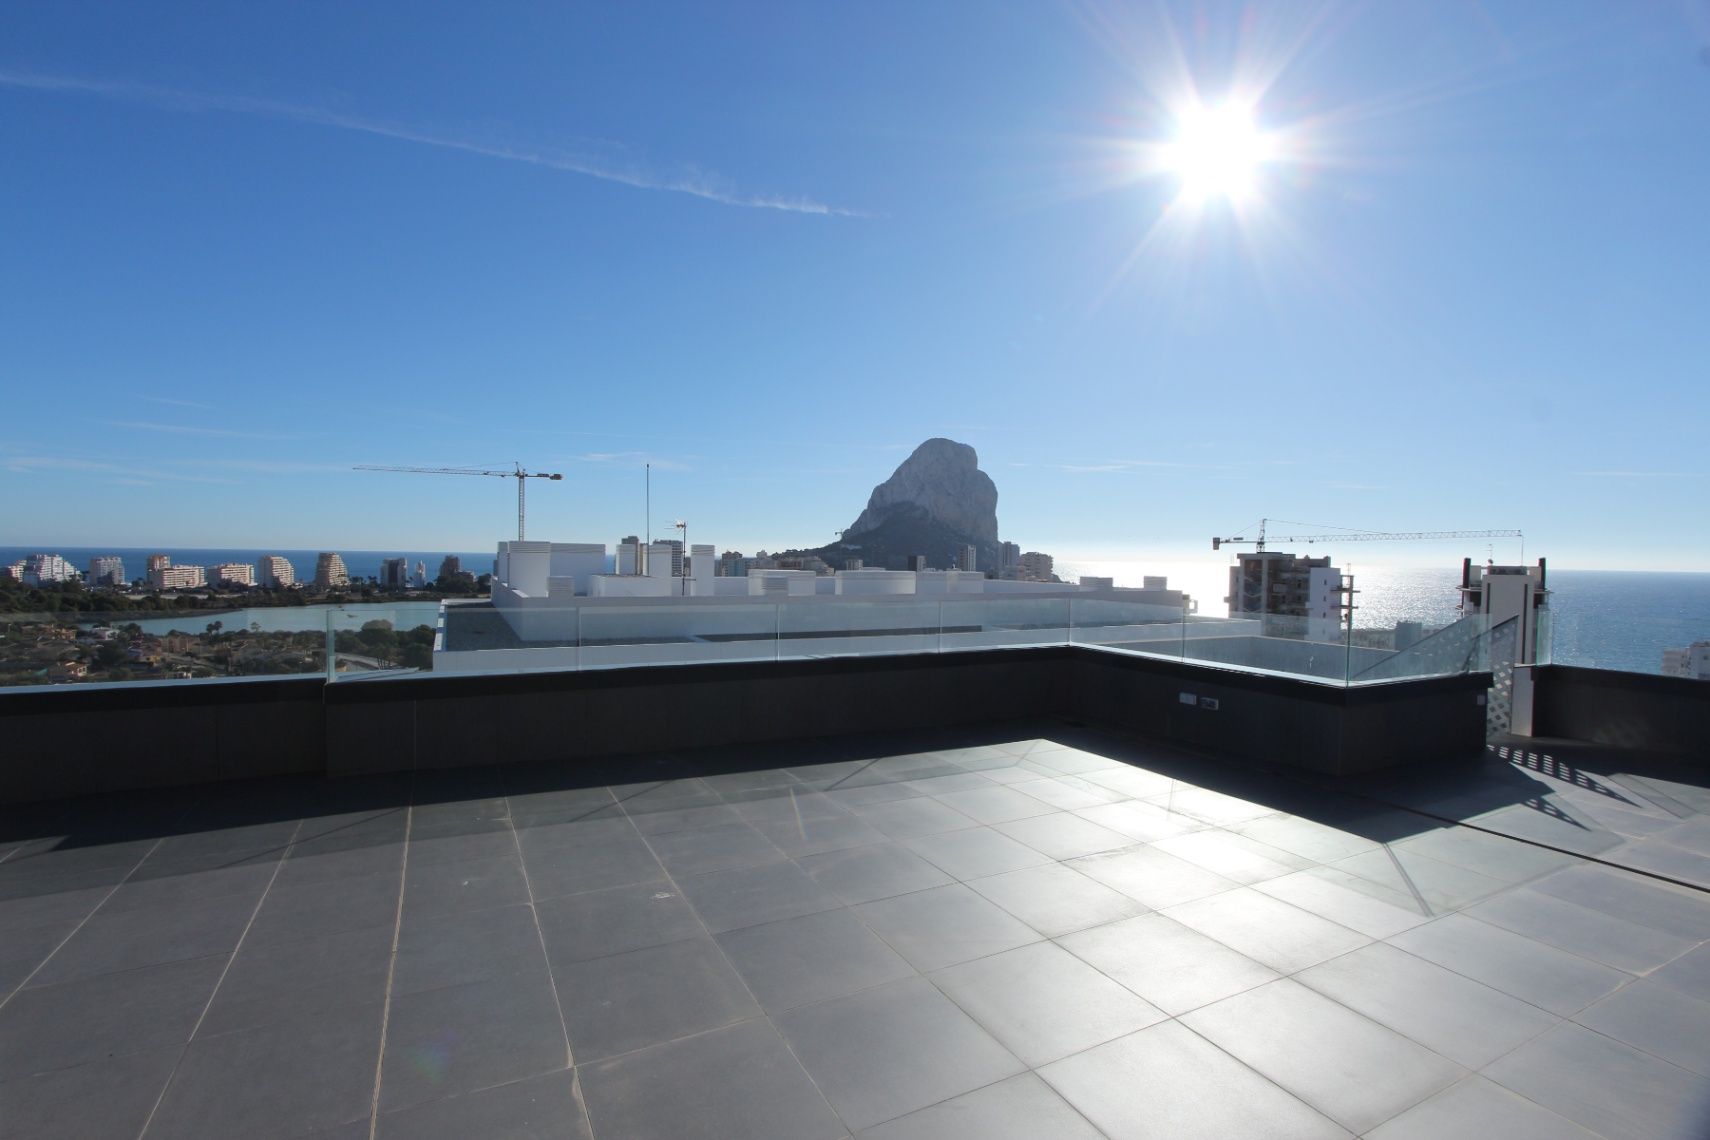 BRAND NEW PENTHOUSE IN CALPE FOR SALE, WITH PANORAMIC VIEWS